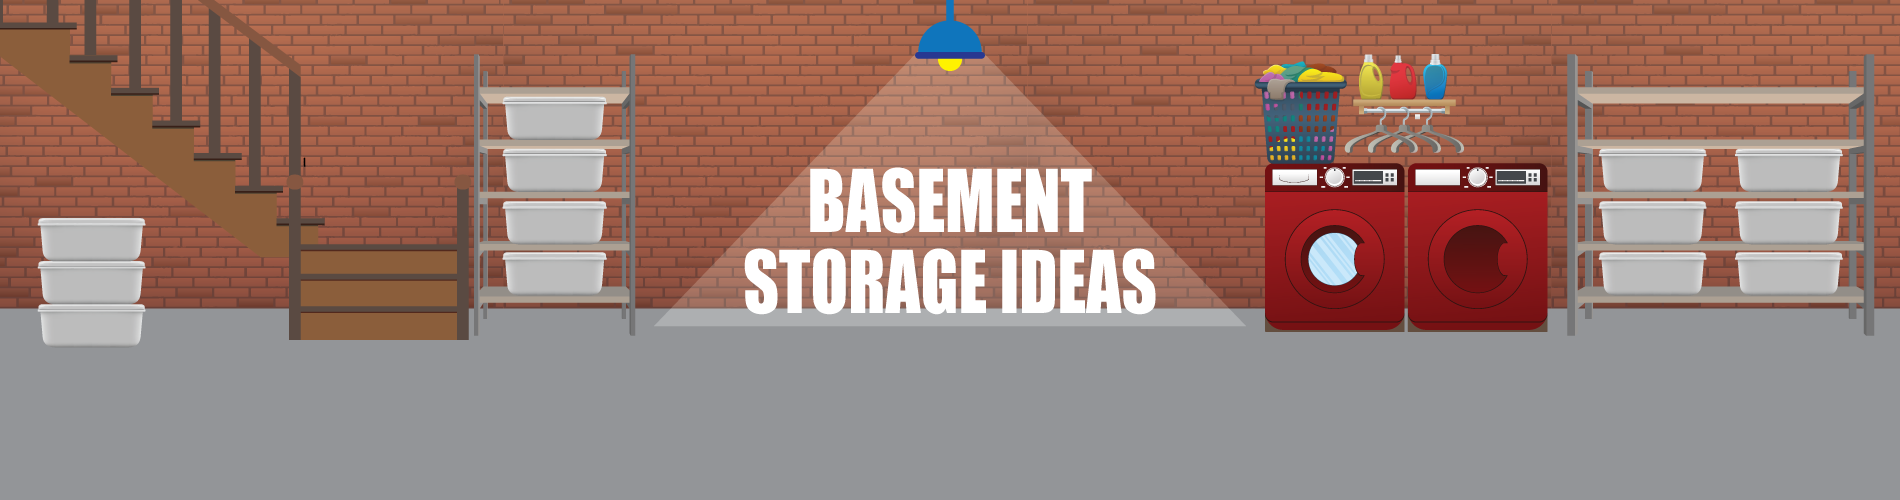 basement storage ideas from Rent-a-Space